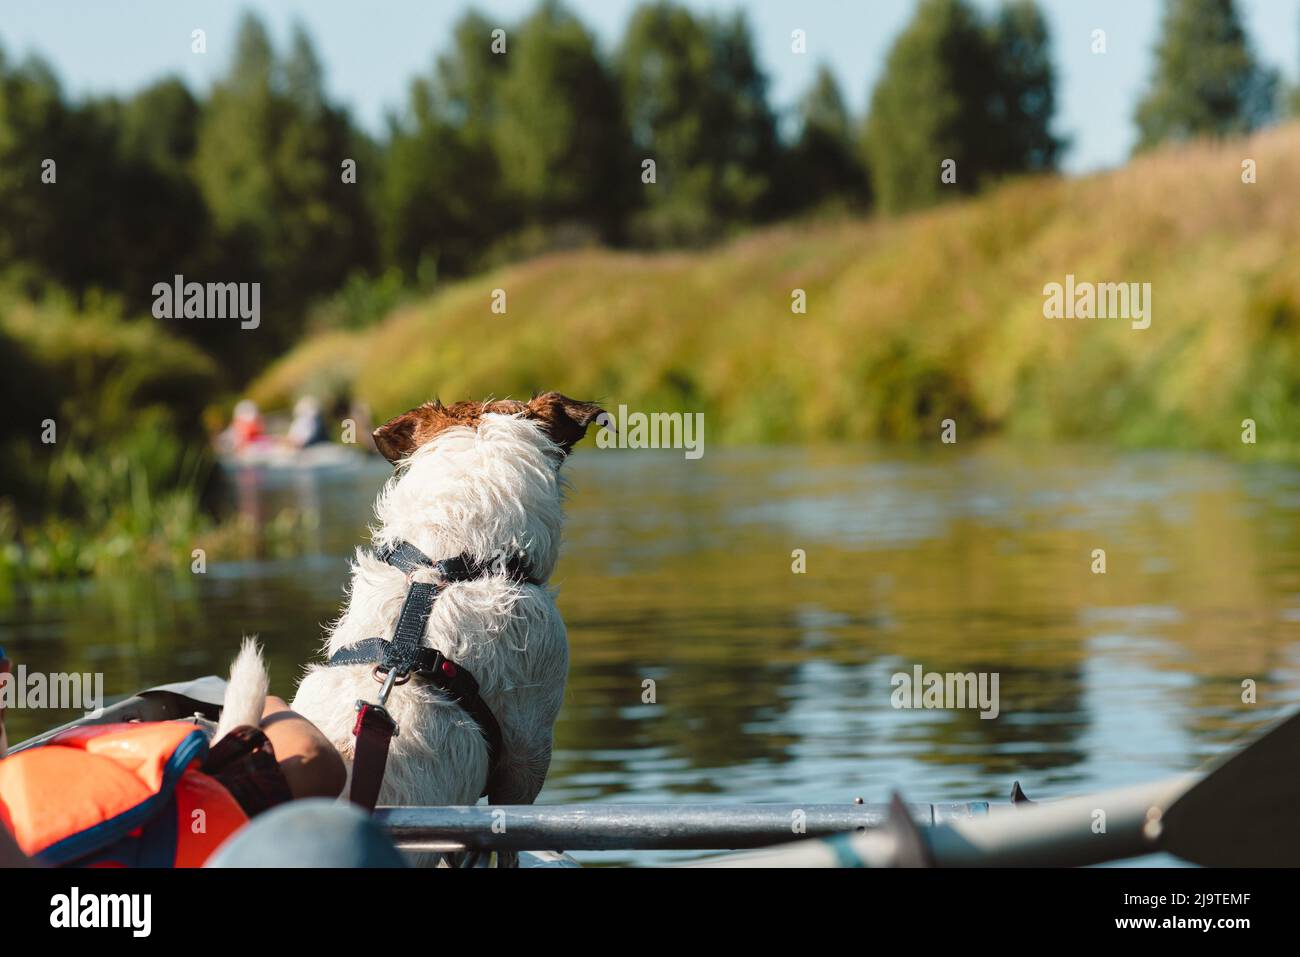 Family with children and dog kayaking on calm river on sunny day Stock Photo